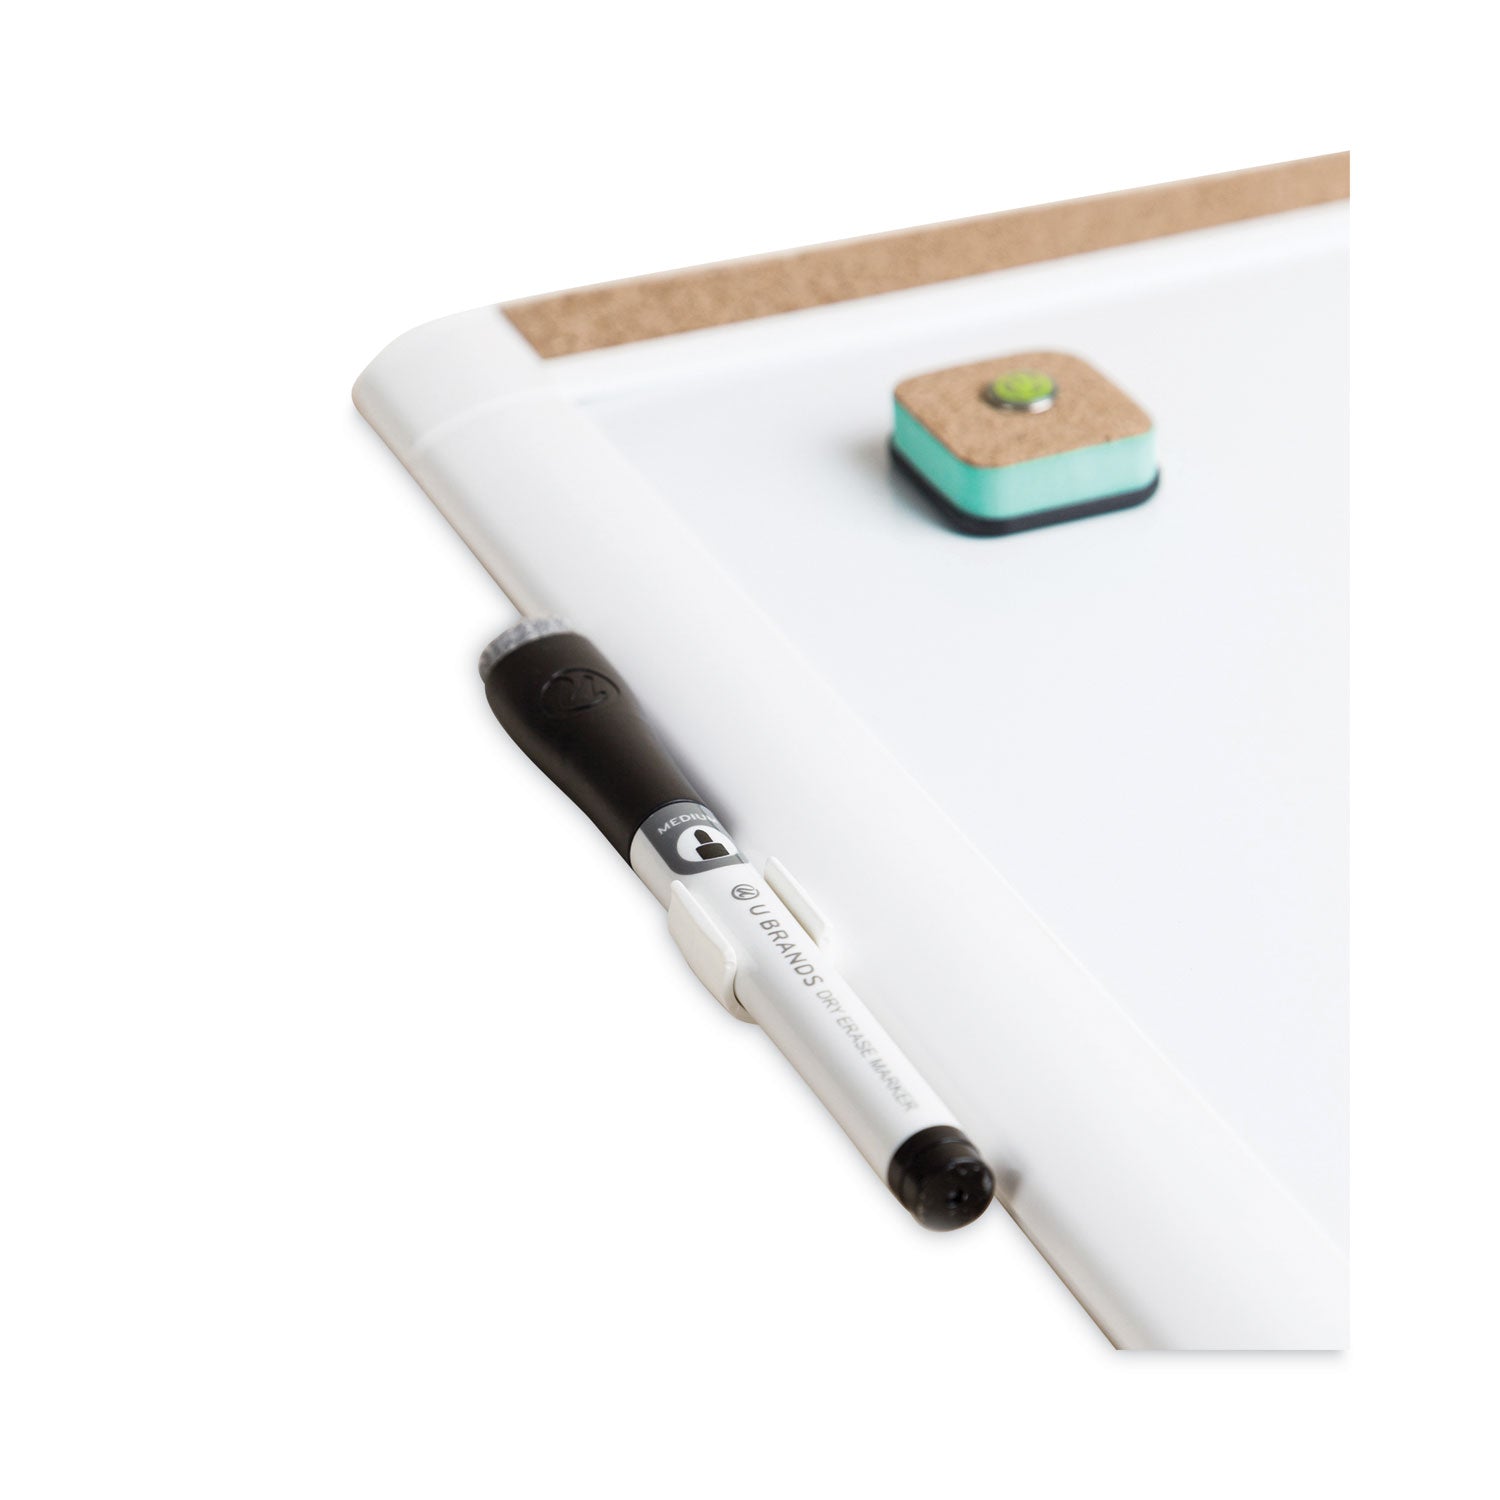 pinit-magnetic-dry-erase-board-with-plastic-frame-20-x-16-white-surface-white-plastic-frame_ubr428u0001 - 2